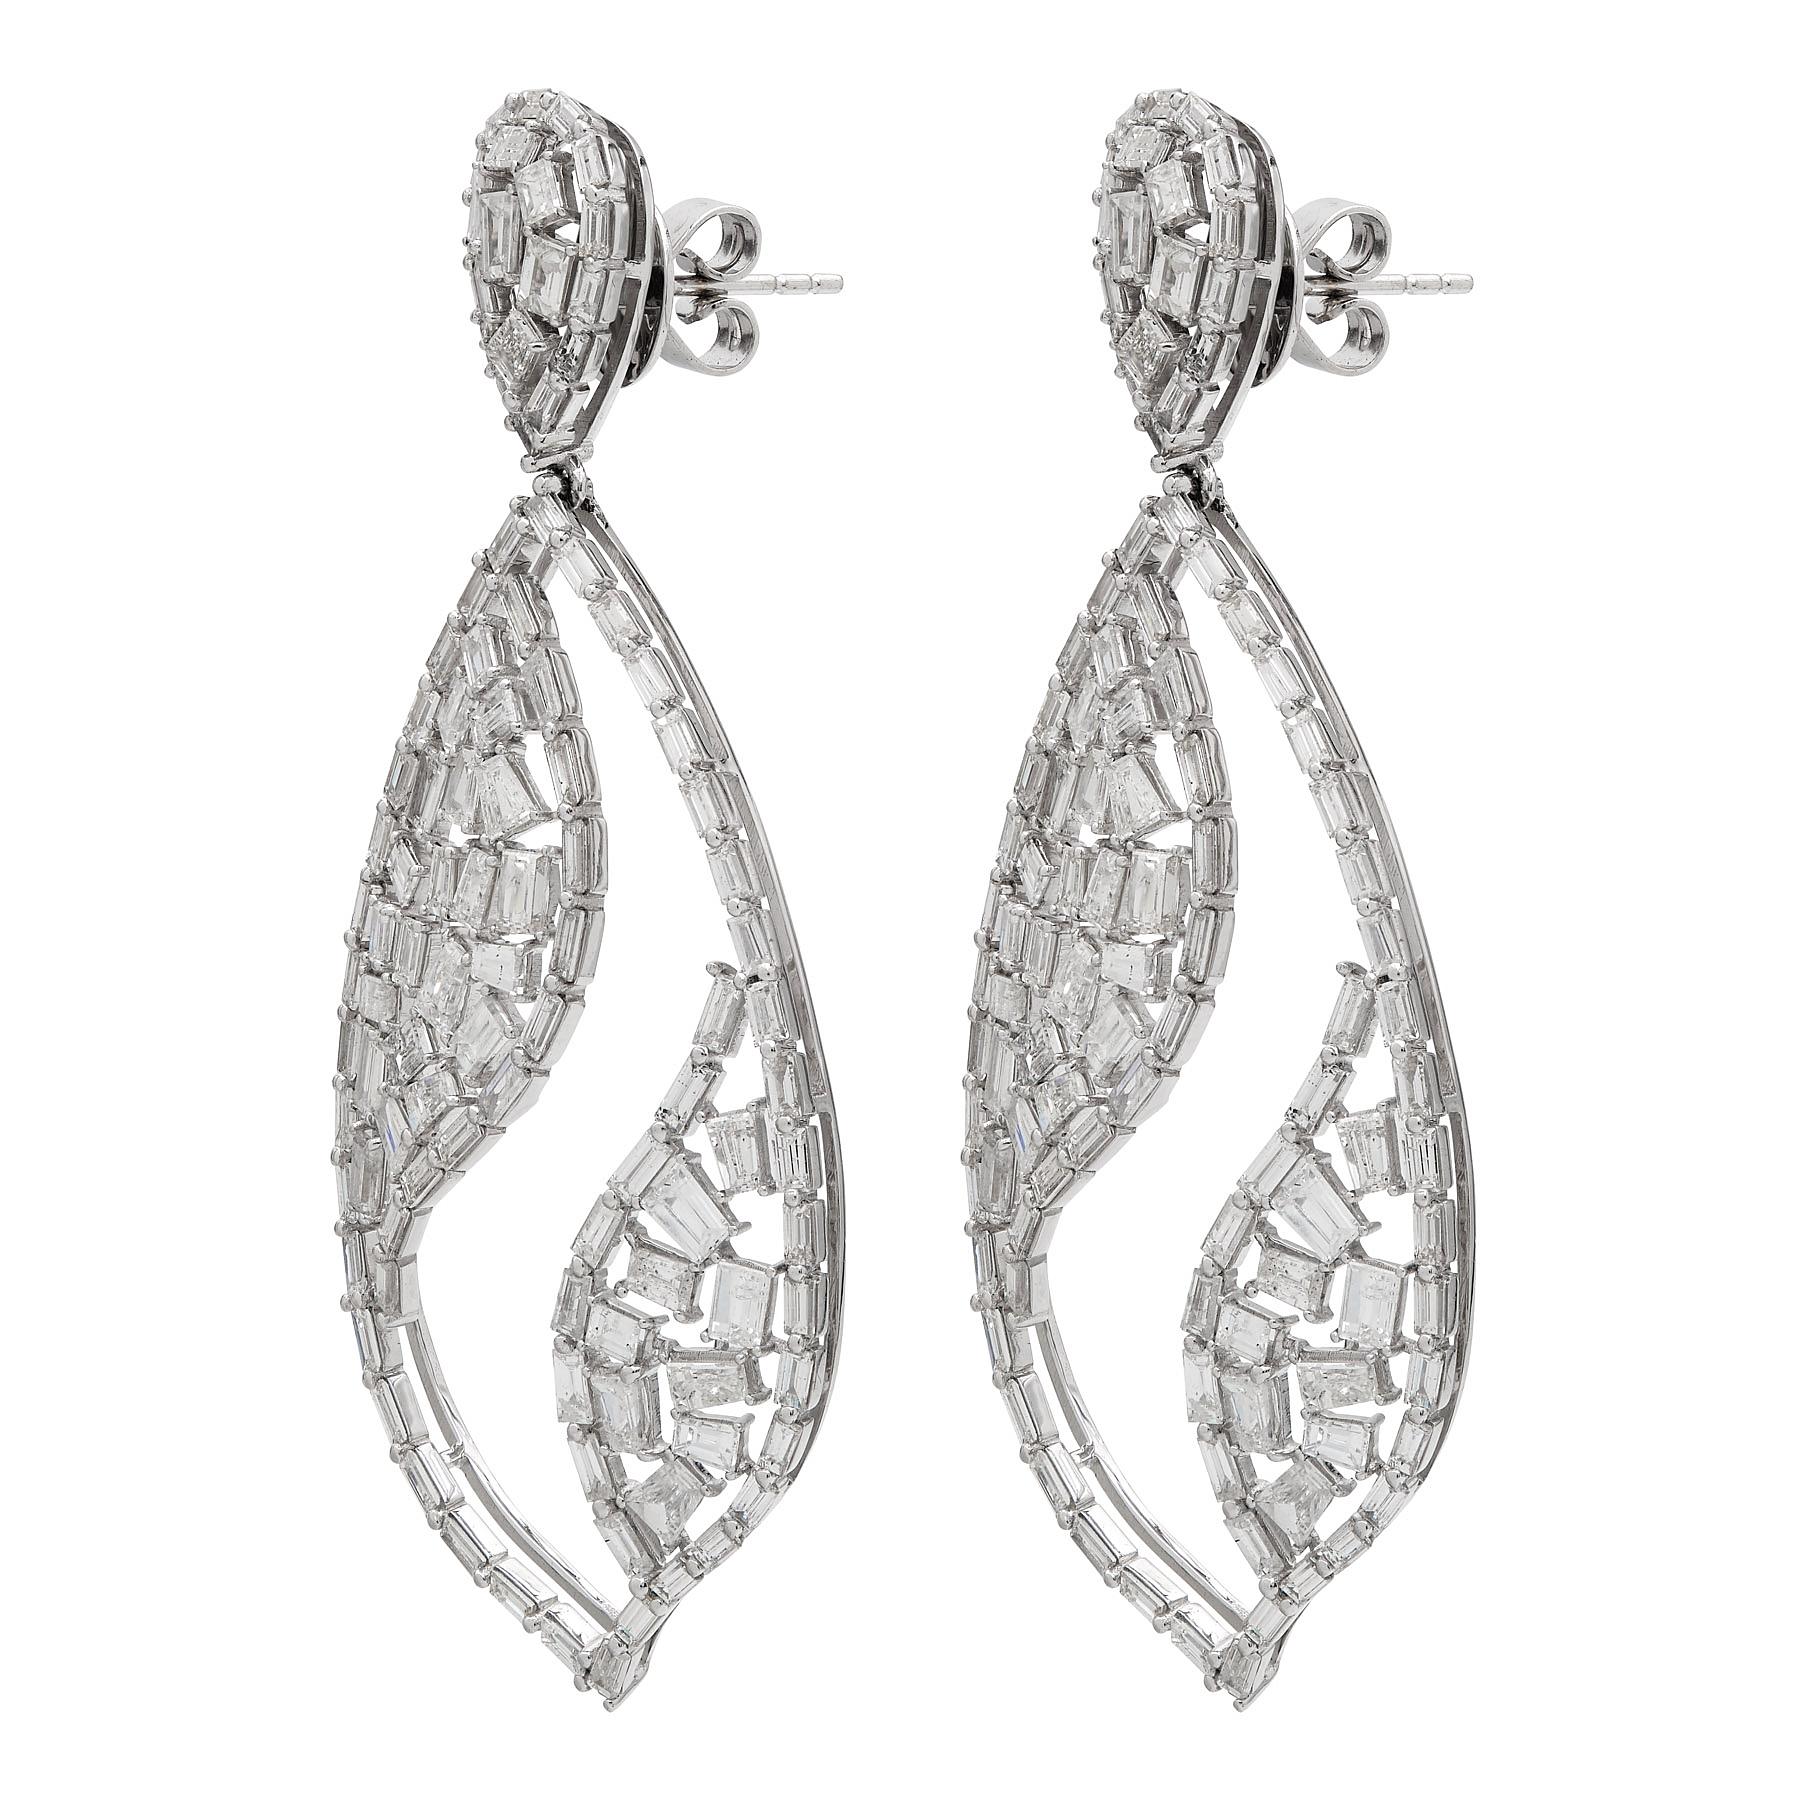 18K White Gold
Diamonds: 9.43ct total weight.
All diamonds are G-H/SI stones.